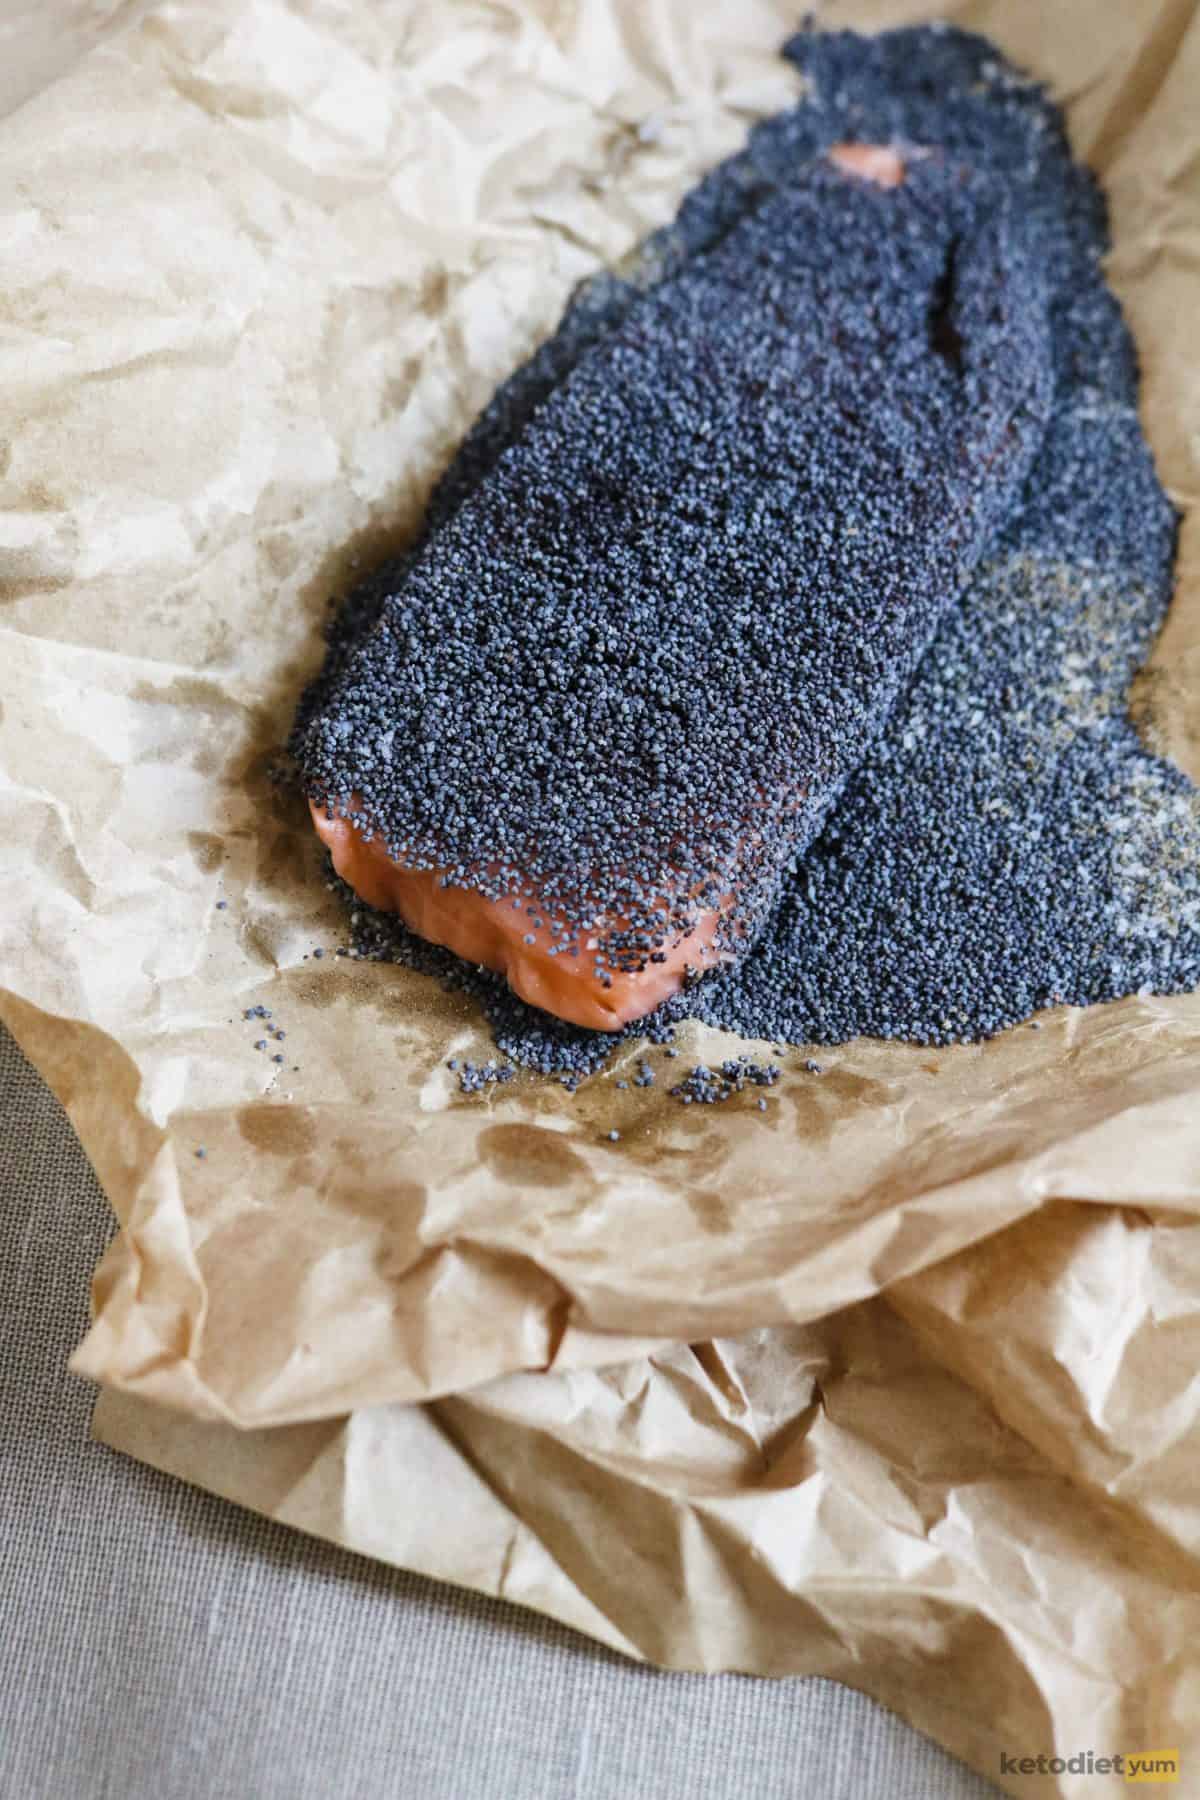 Coating salmon fillets with poppy seeds